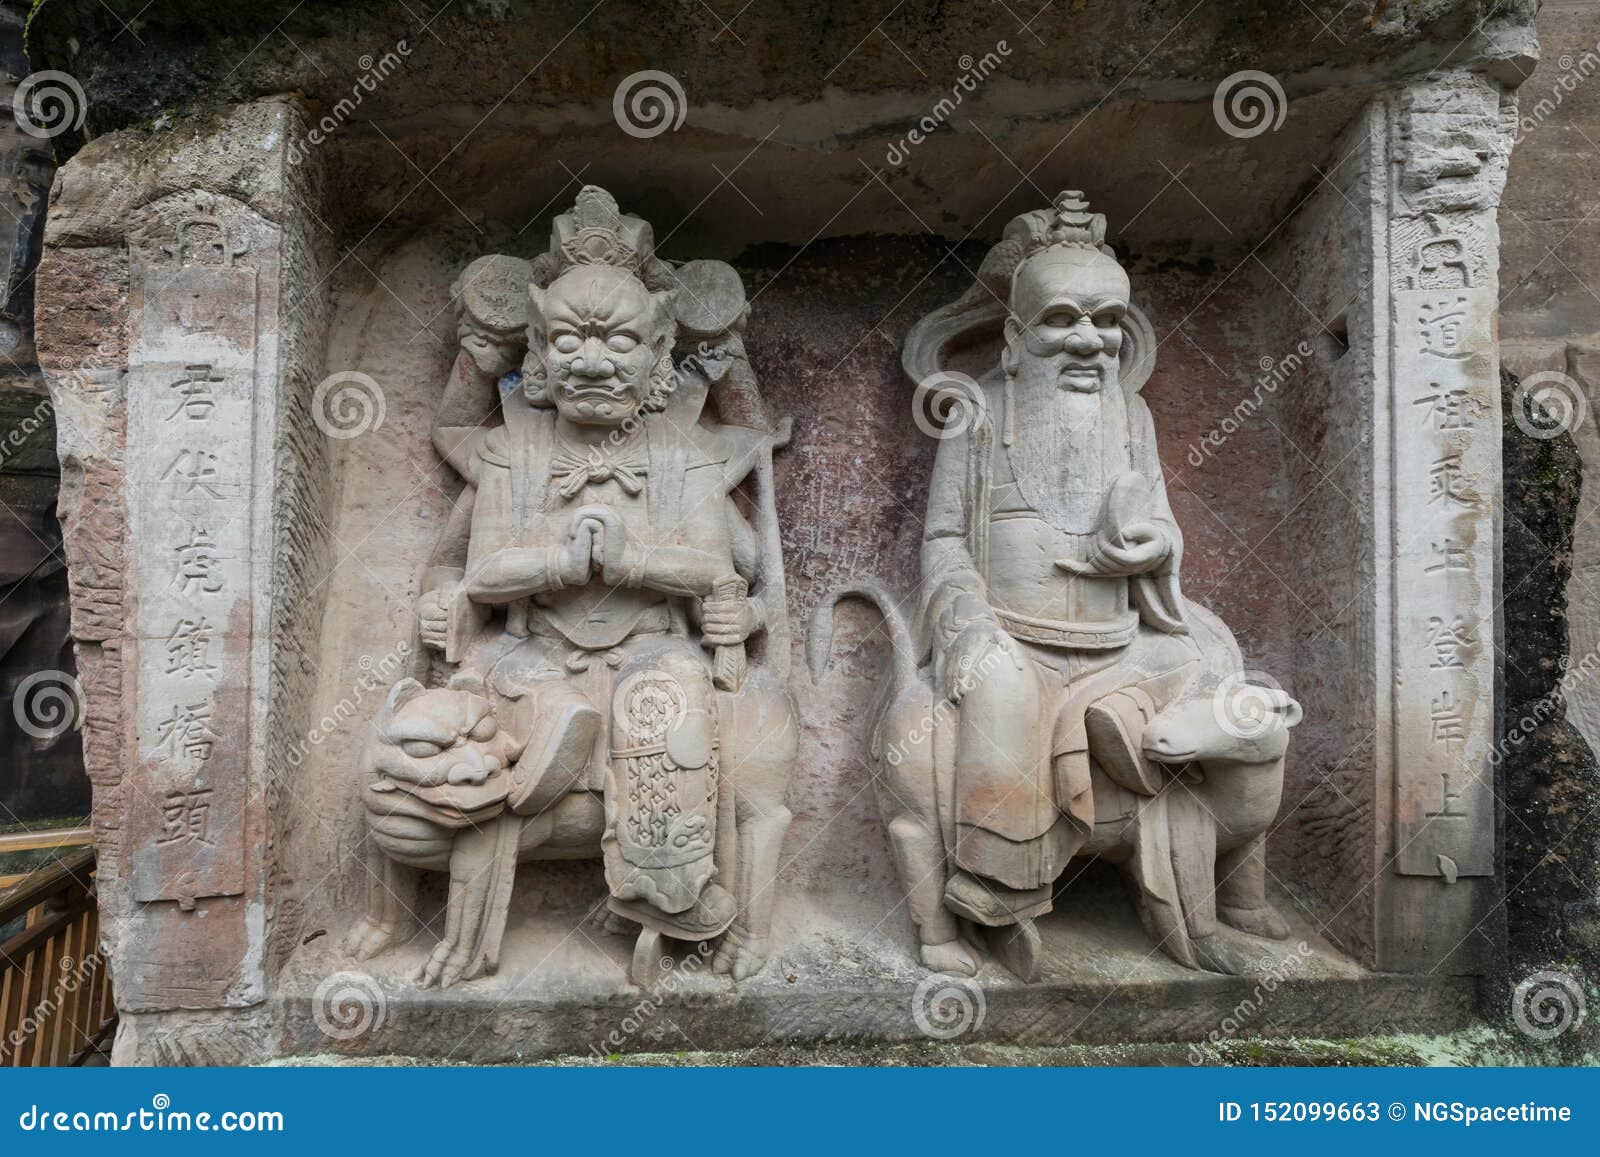 taoist reliefs of laozi or supreme lord and mountain god